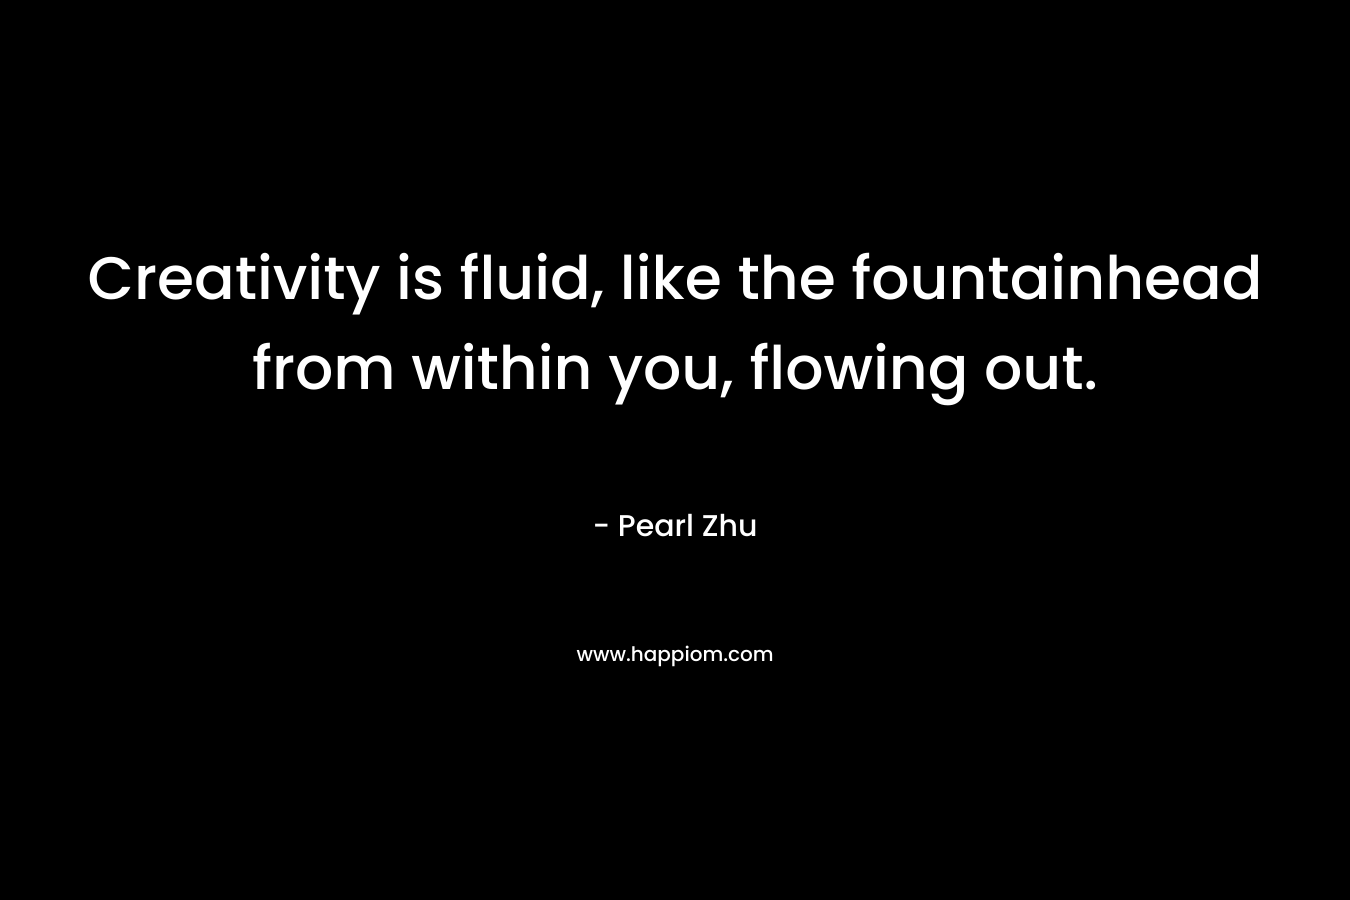 Creativity is fluid, like the fountainhead from within you, flowing out.